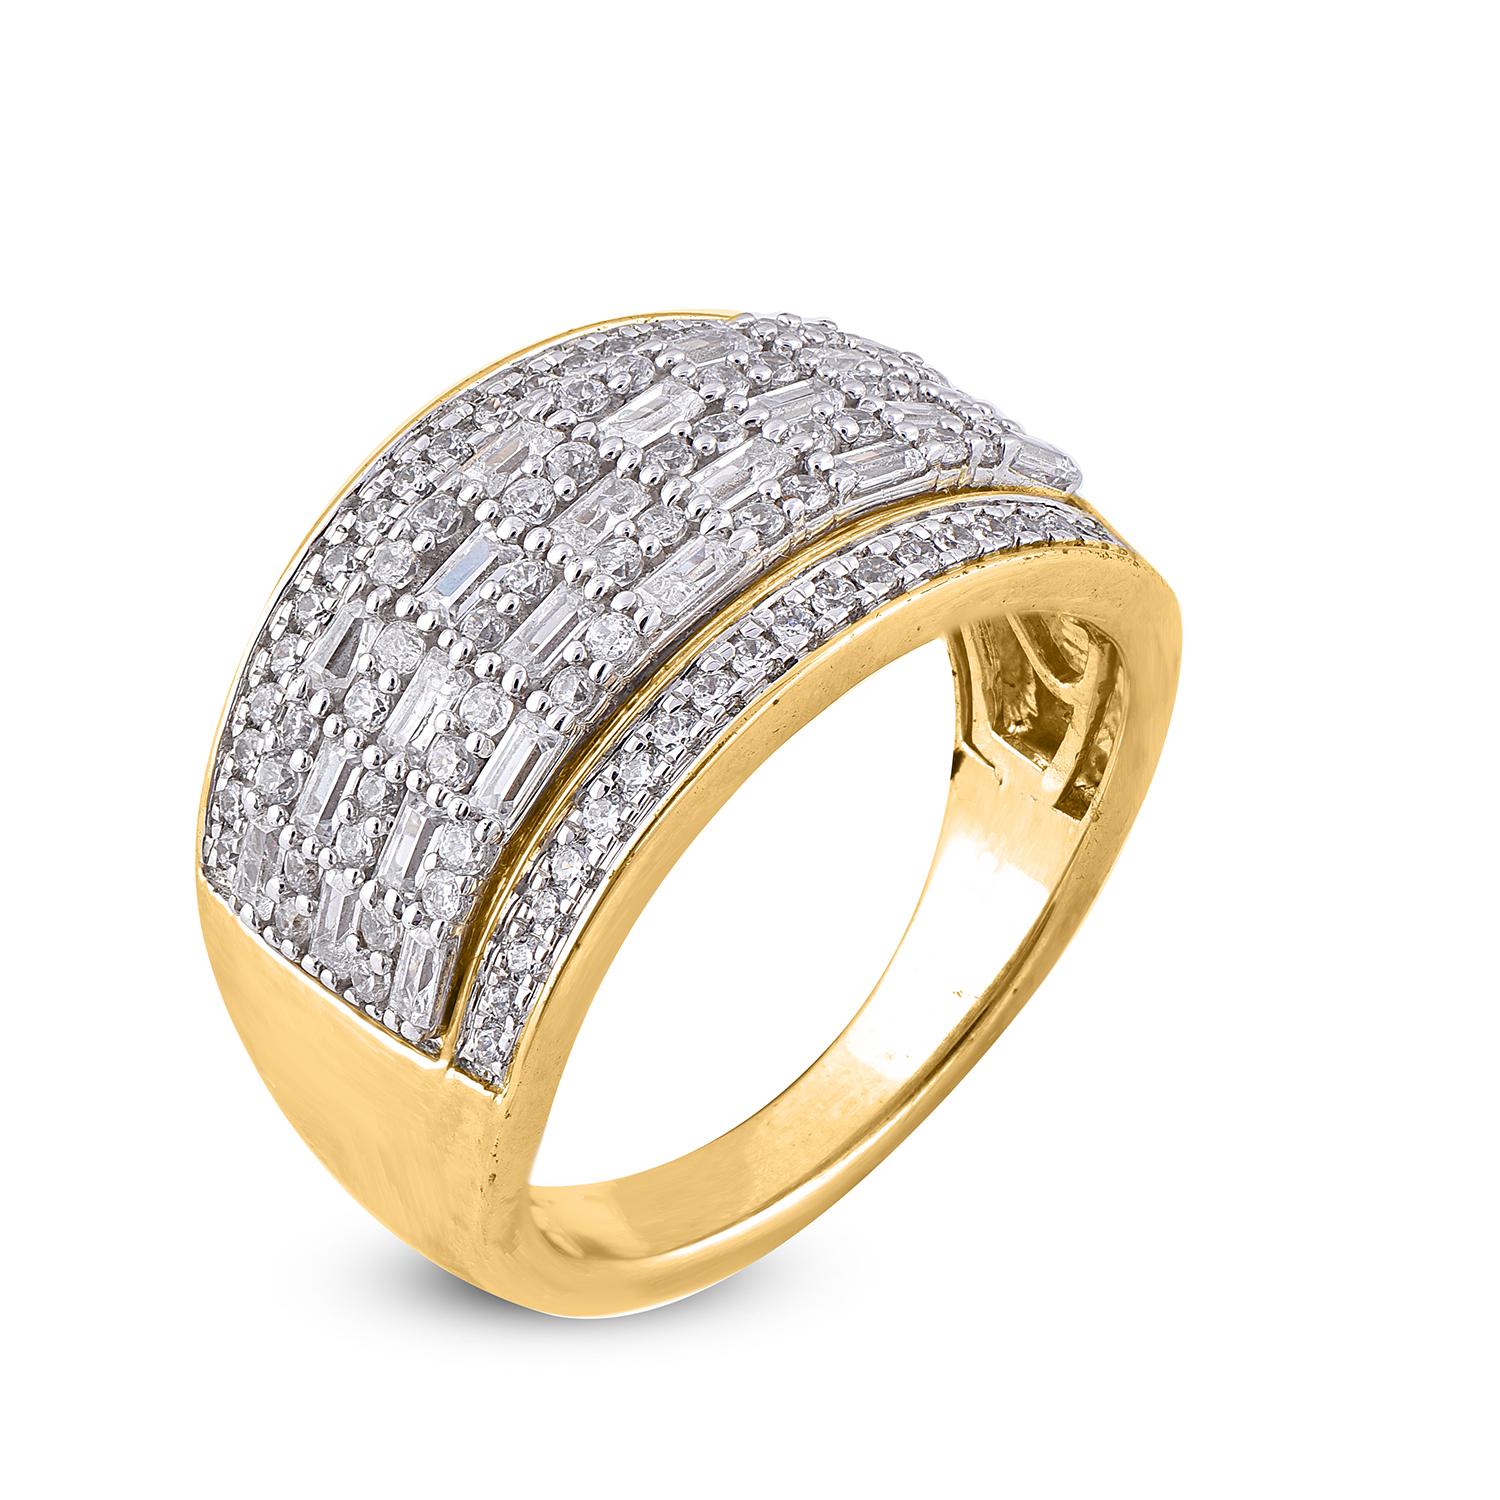 Stunning with color and sparkle, this wide wedding ring proclaims her sophistication. The ring is crafted from 14 karat gold in your choice of white, rose, or yellow, and features Round 122 white diamonds, pave set, H-I color I2 clarity and a high